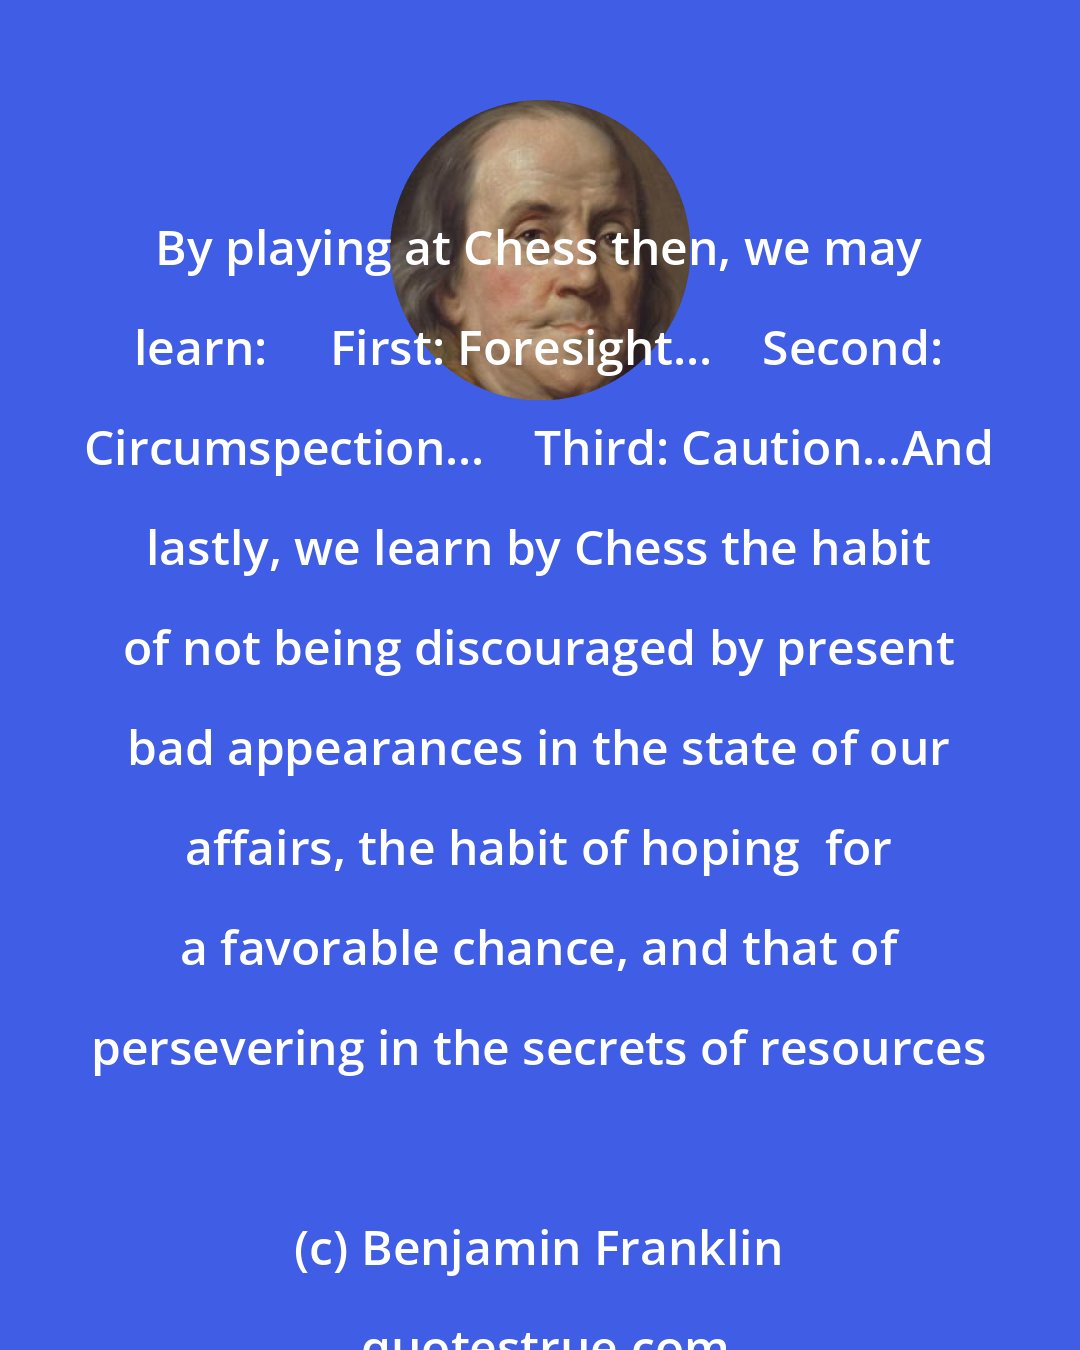 Benjamin Franklin: By playing at Chess then, we may learn:     First: Foresight...    Second: Circumspection...    Third: Caution...And lastly, we learn by Chess the habit of not being discouraged by present bad appearances in the state of our affairs, the habit of hoping  for a favorable chance, and that of persevering in the secrets of resources